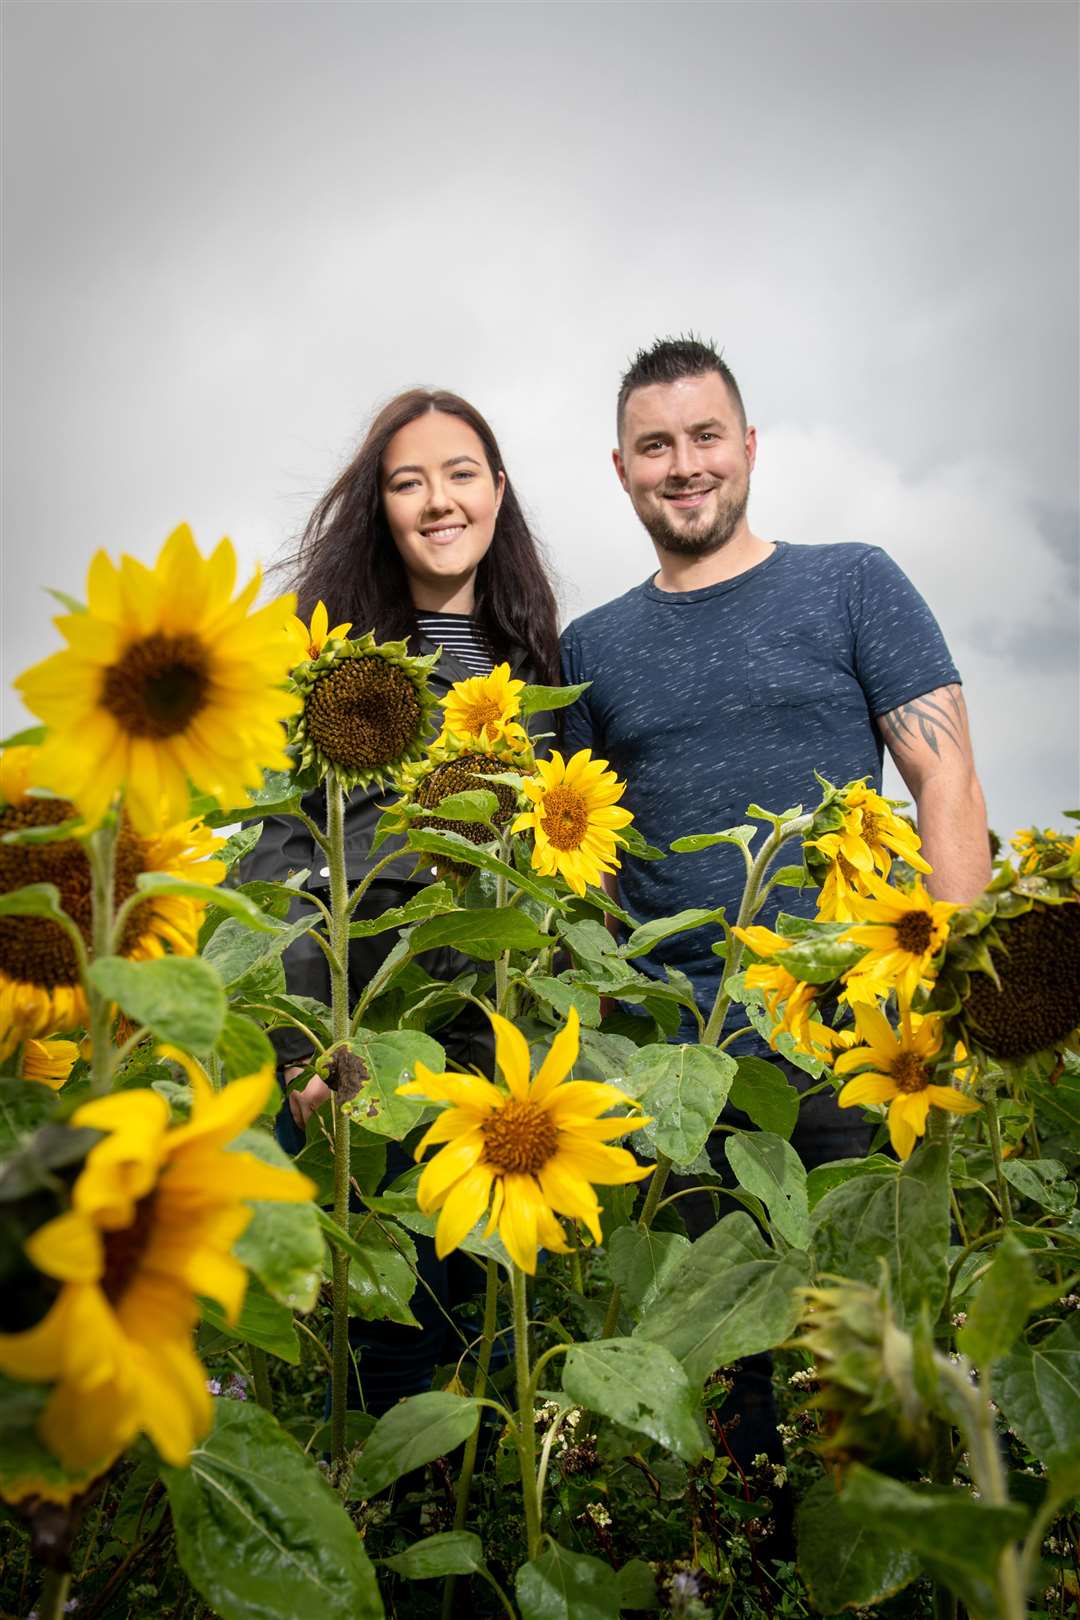 Robert Craigie and his fiance Lucy Barclay have been growing sunflowers for three local charities. Picture: Callum Mackay